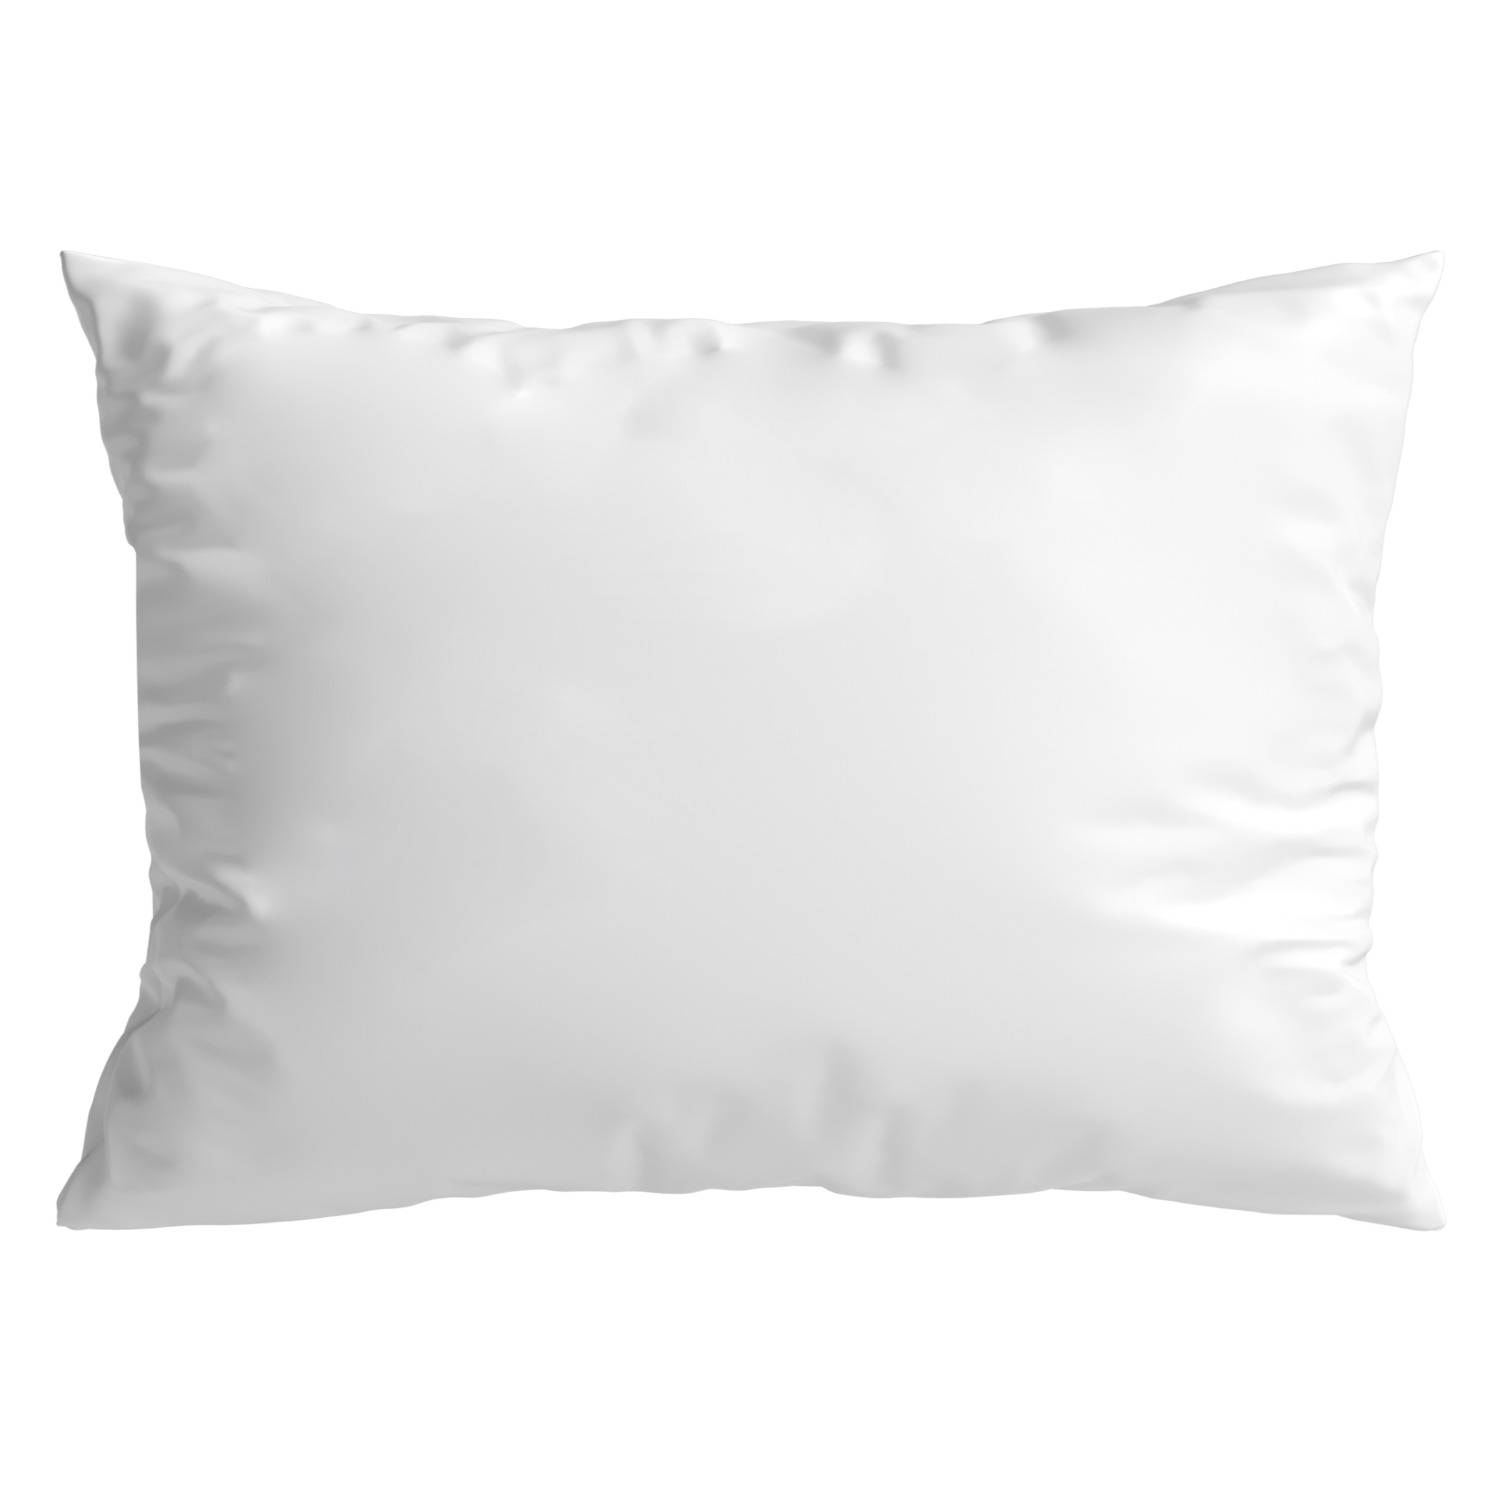 [a.o.b] another powder milk pillow cover